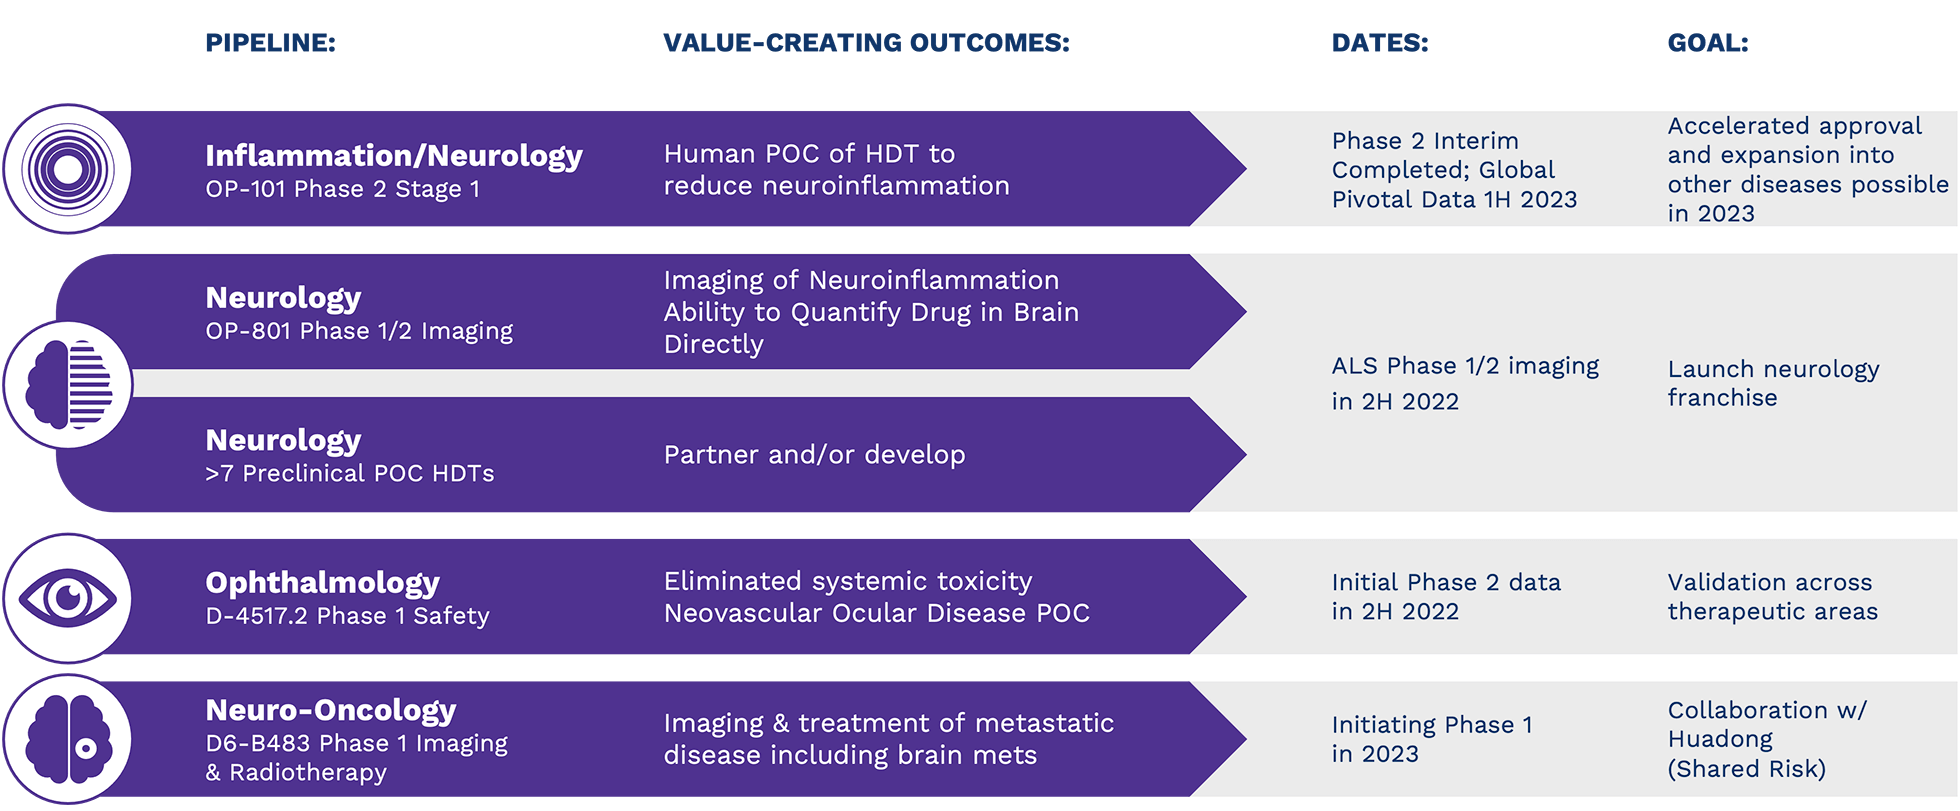 Pipeline: Value-Creating Outcomes